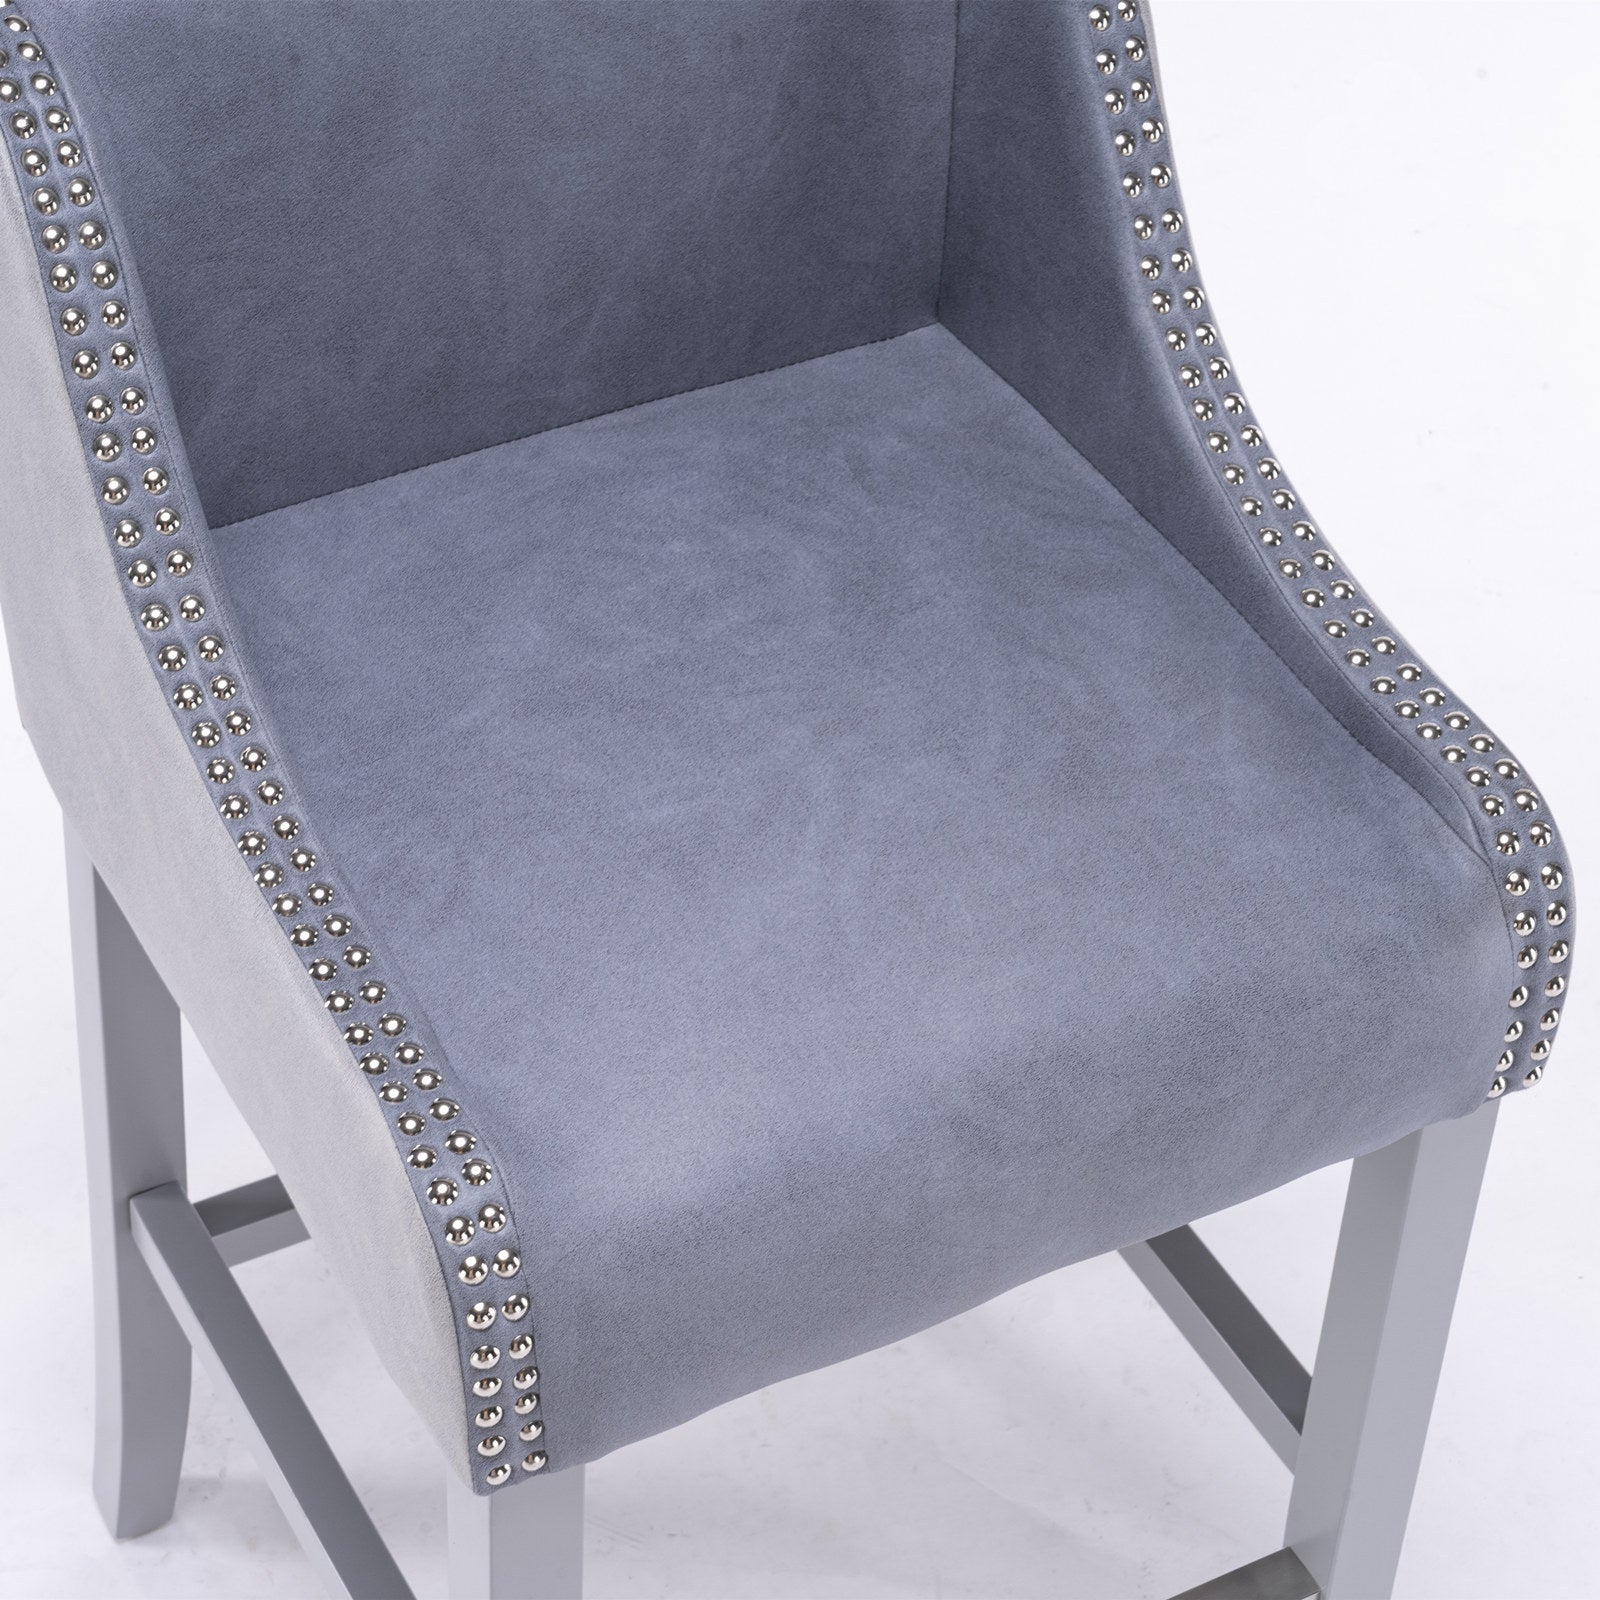 28 Inch Seat High Barstool with Accent Nail Trim (Set of 2) - Stone Blue and Gray